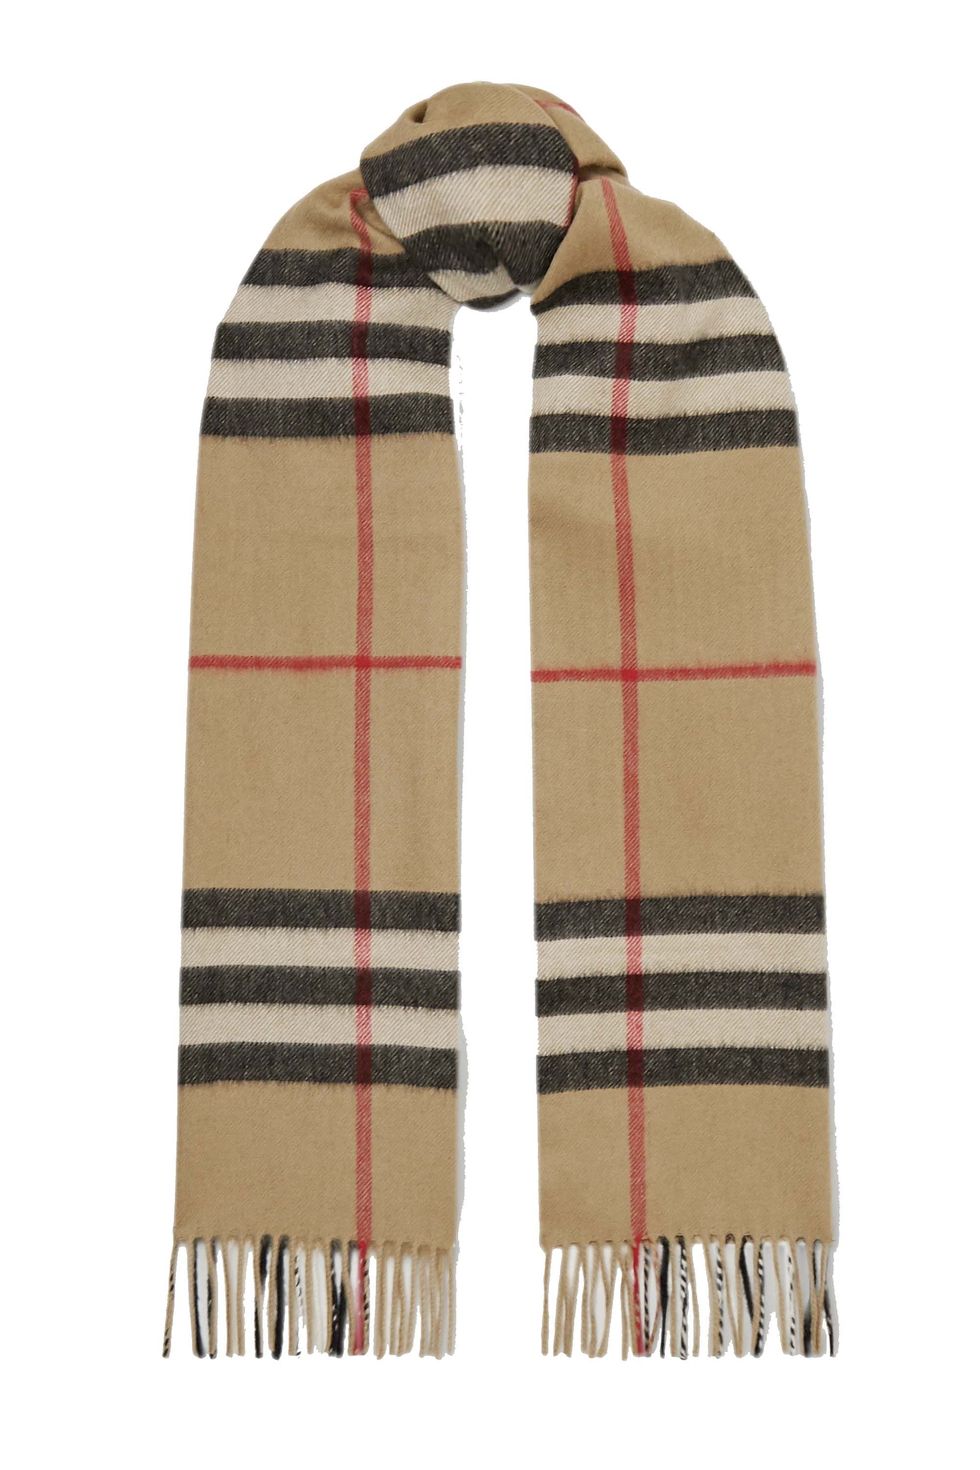 BURBERRY SCARF REVIEW 2019 - BEST LUXURY BUYS 